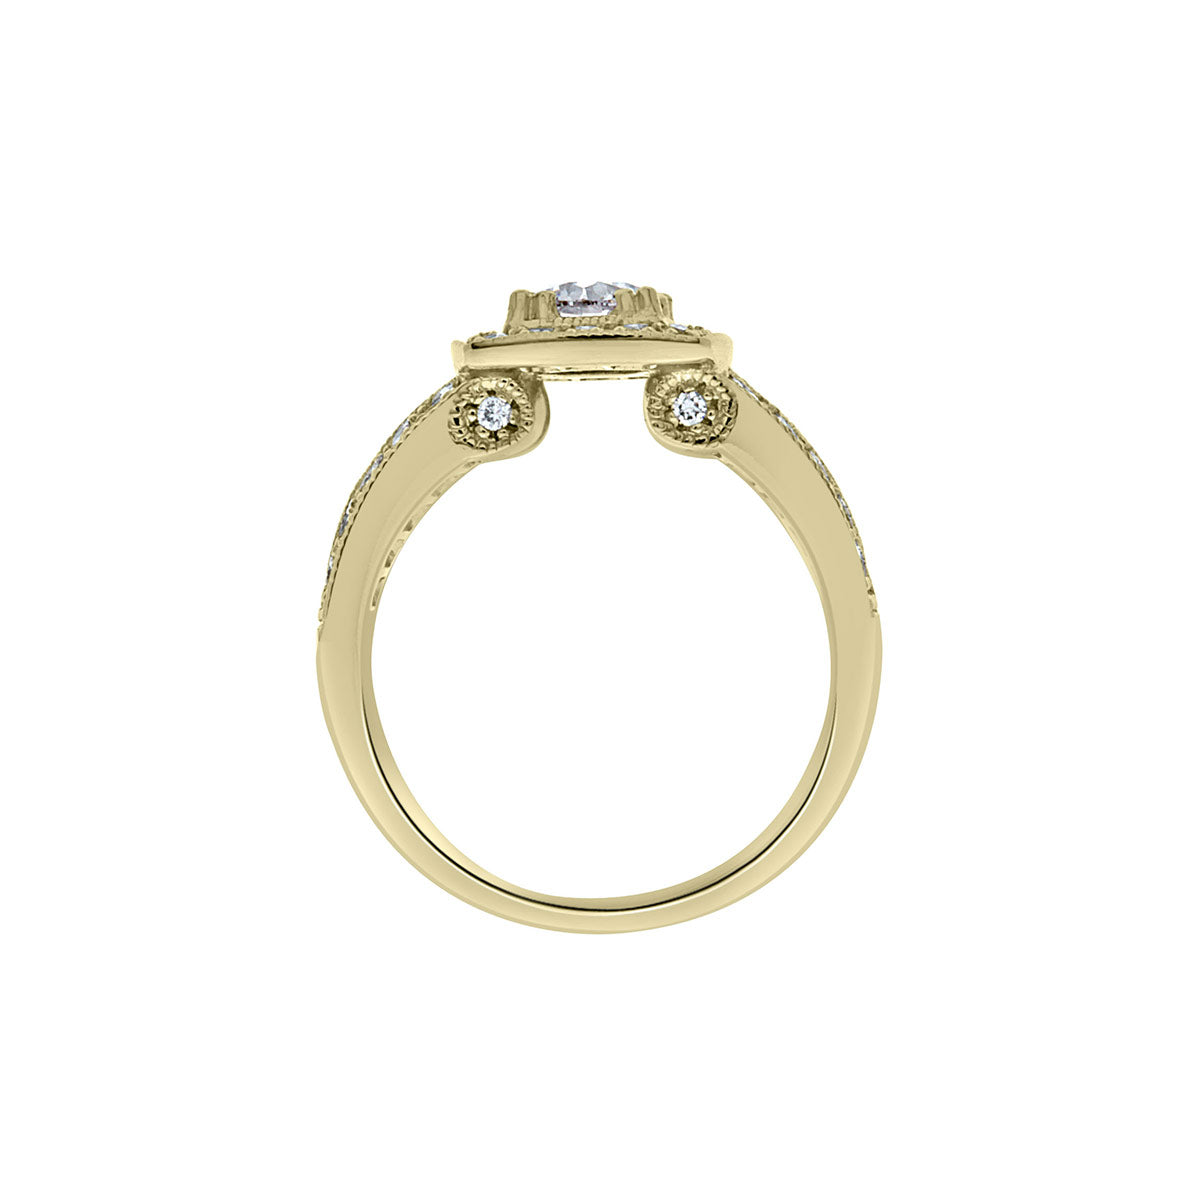 Halo Engagement Ring with Milgrain in yellow gold pictured vertical